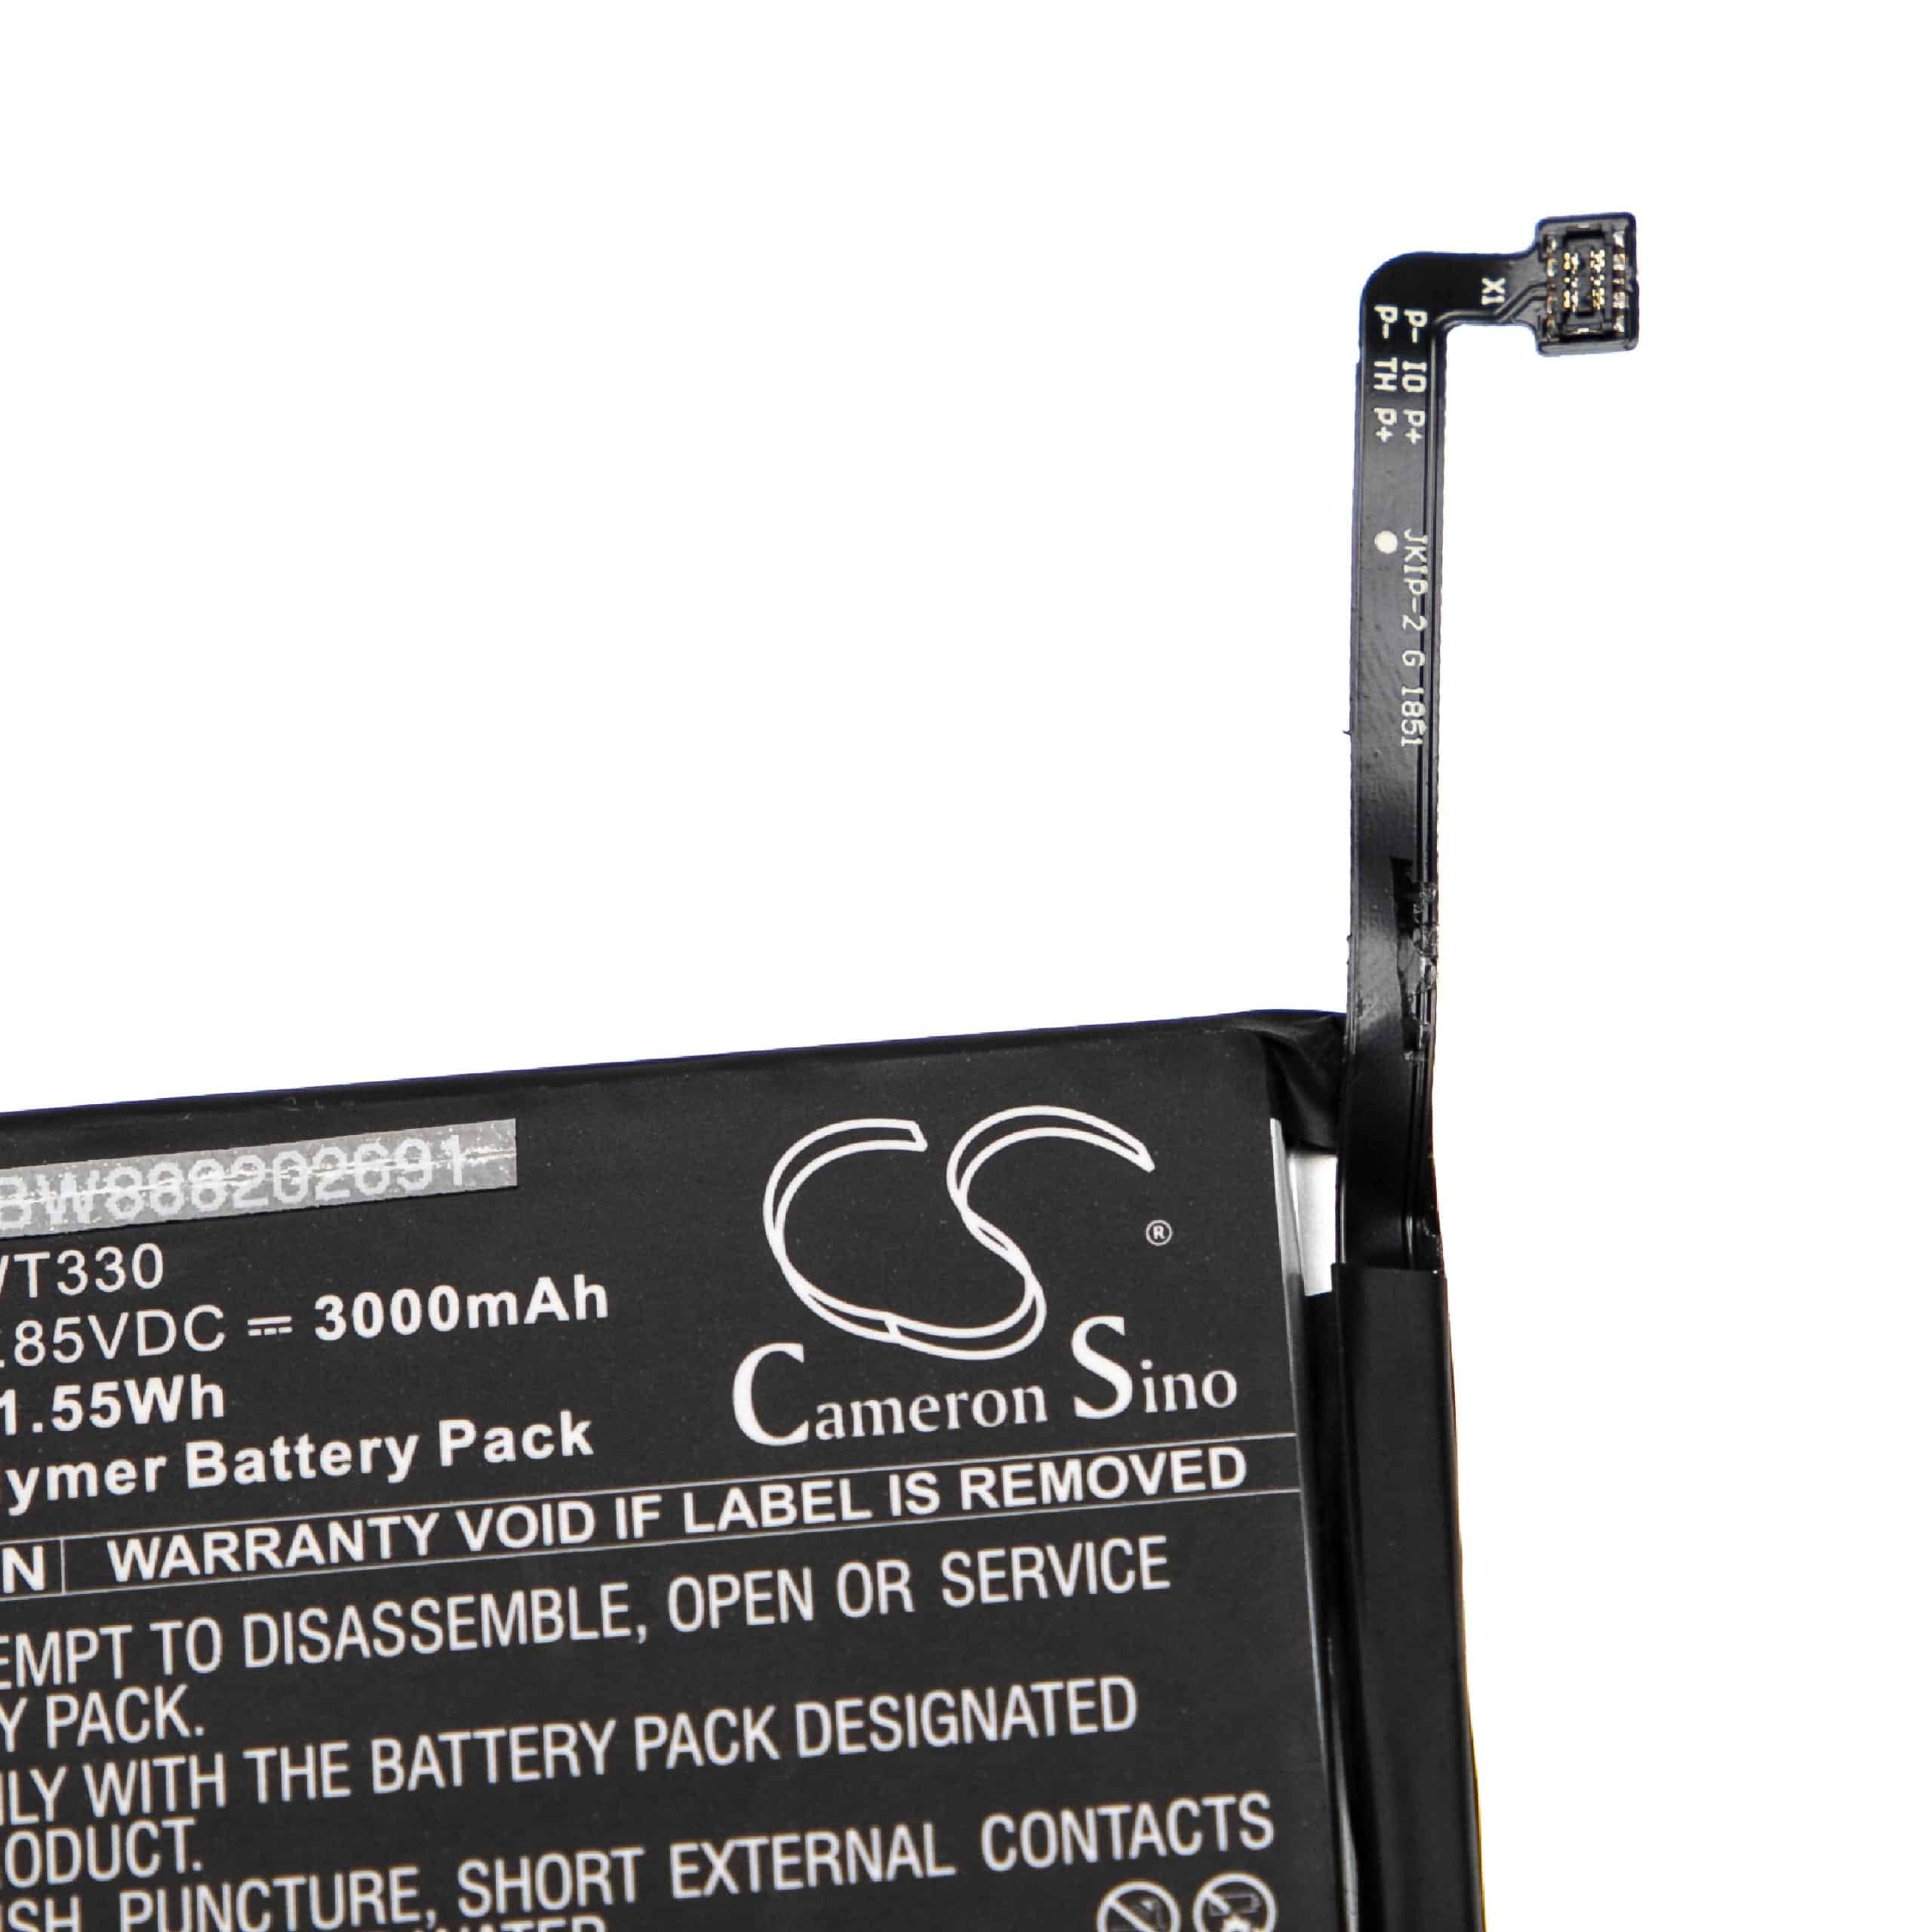 Mobile Phone Battery Replacement for Nokia WT330 - 3000mAh 3.85V Li-polymer